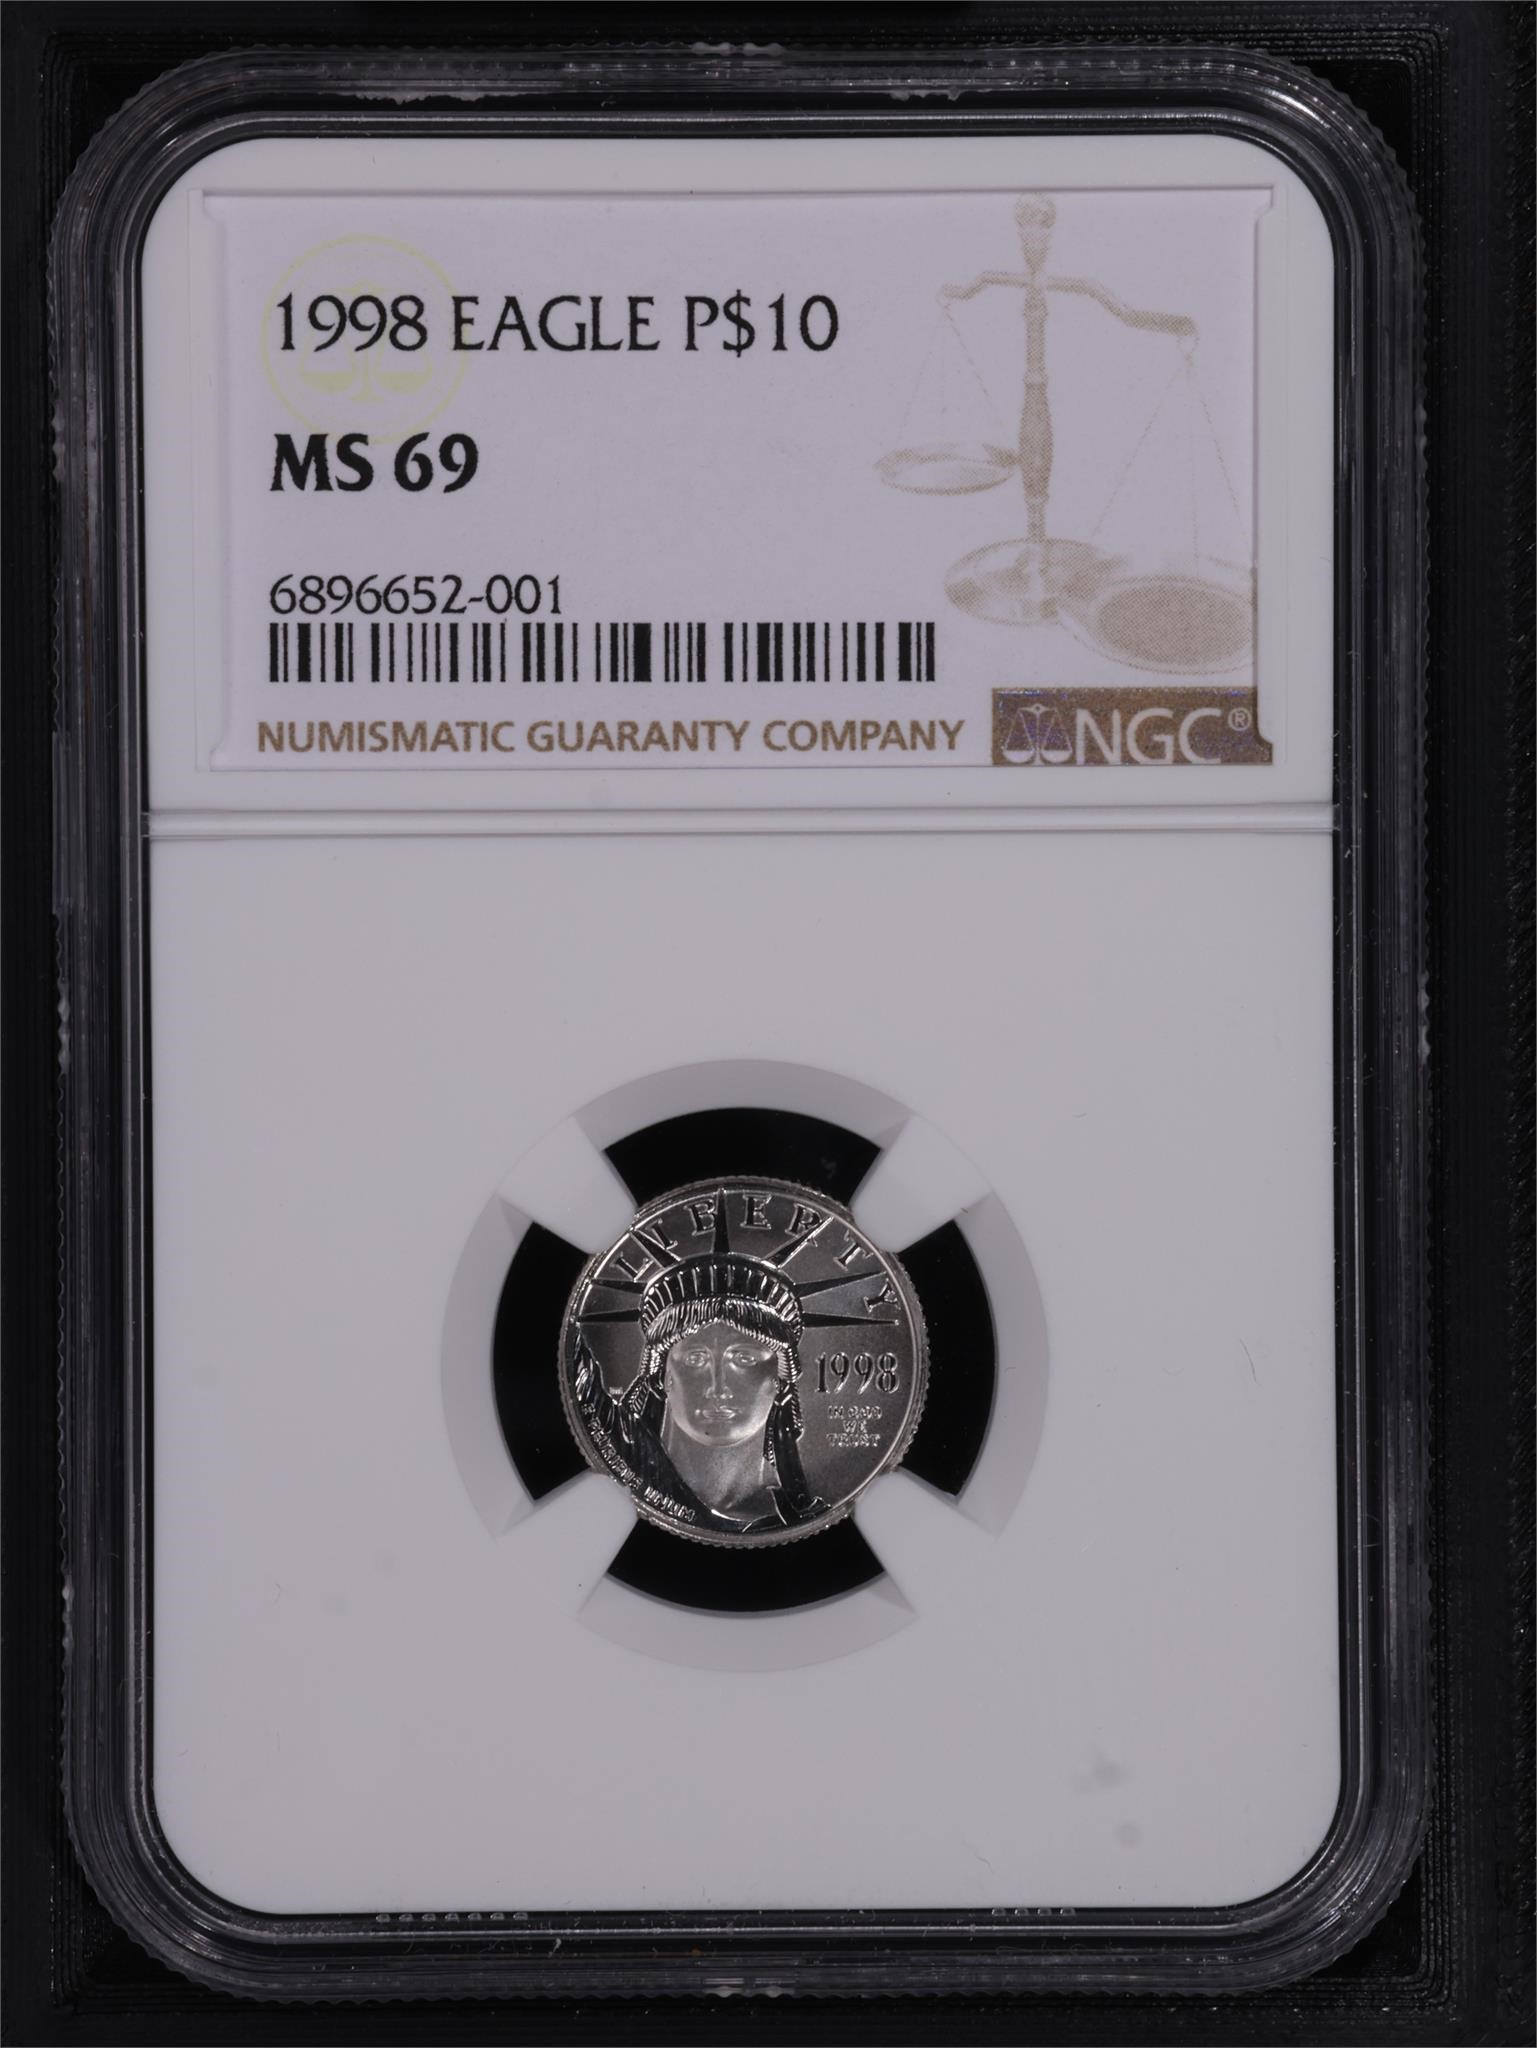 1998 P$10 Eagle NGC MS69 Platinum Coin